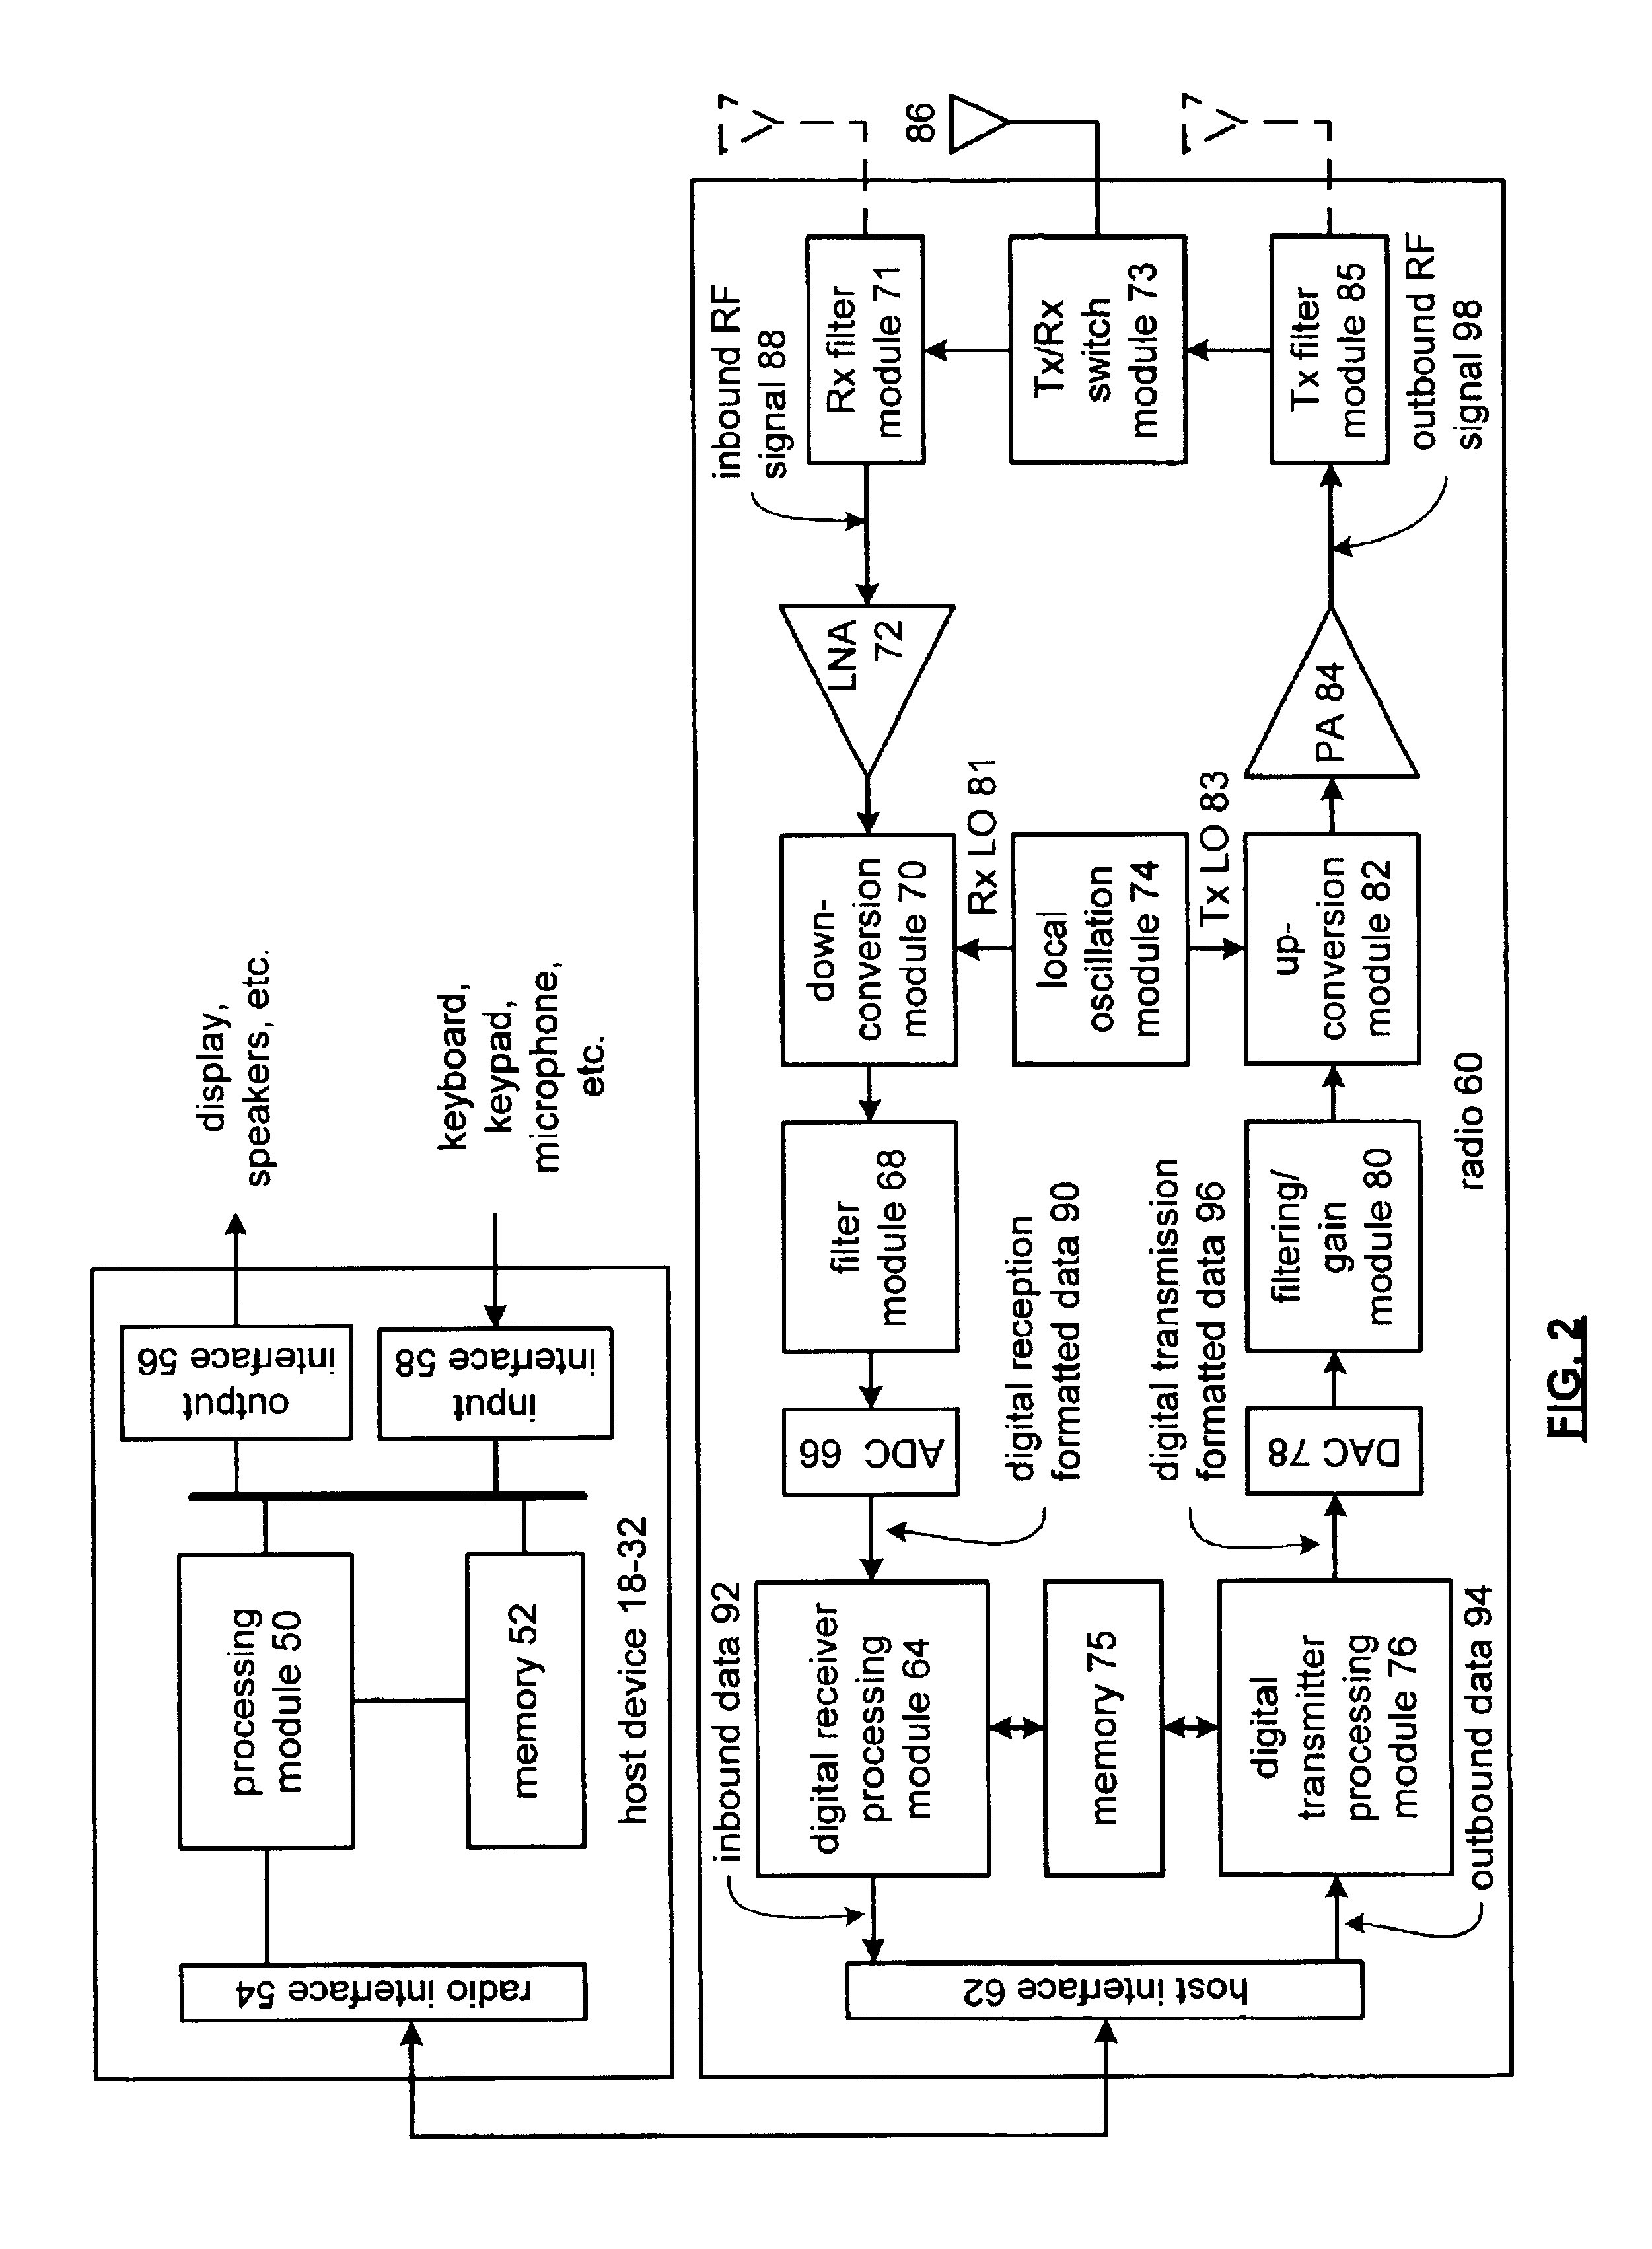 Direct tuning of embedded integrated circuit components